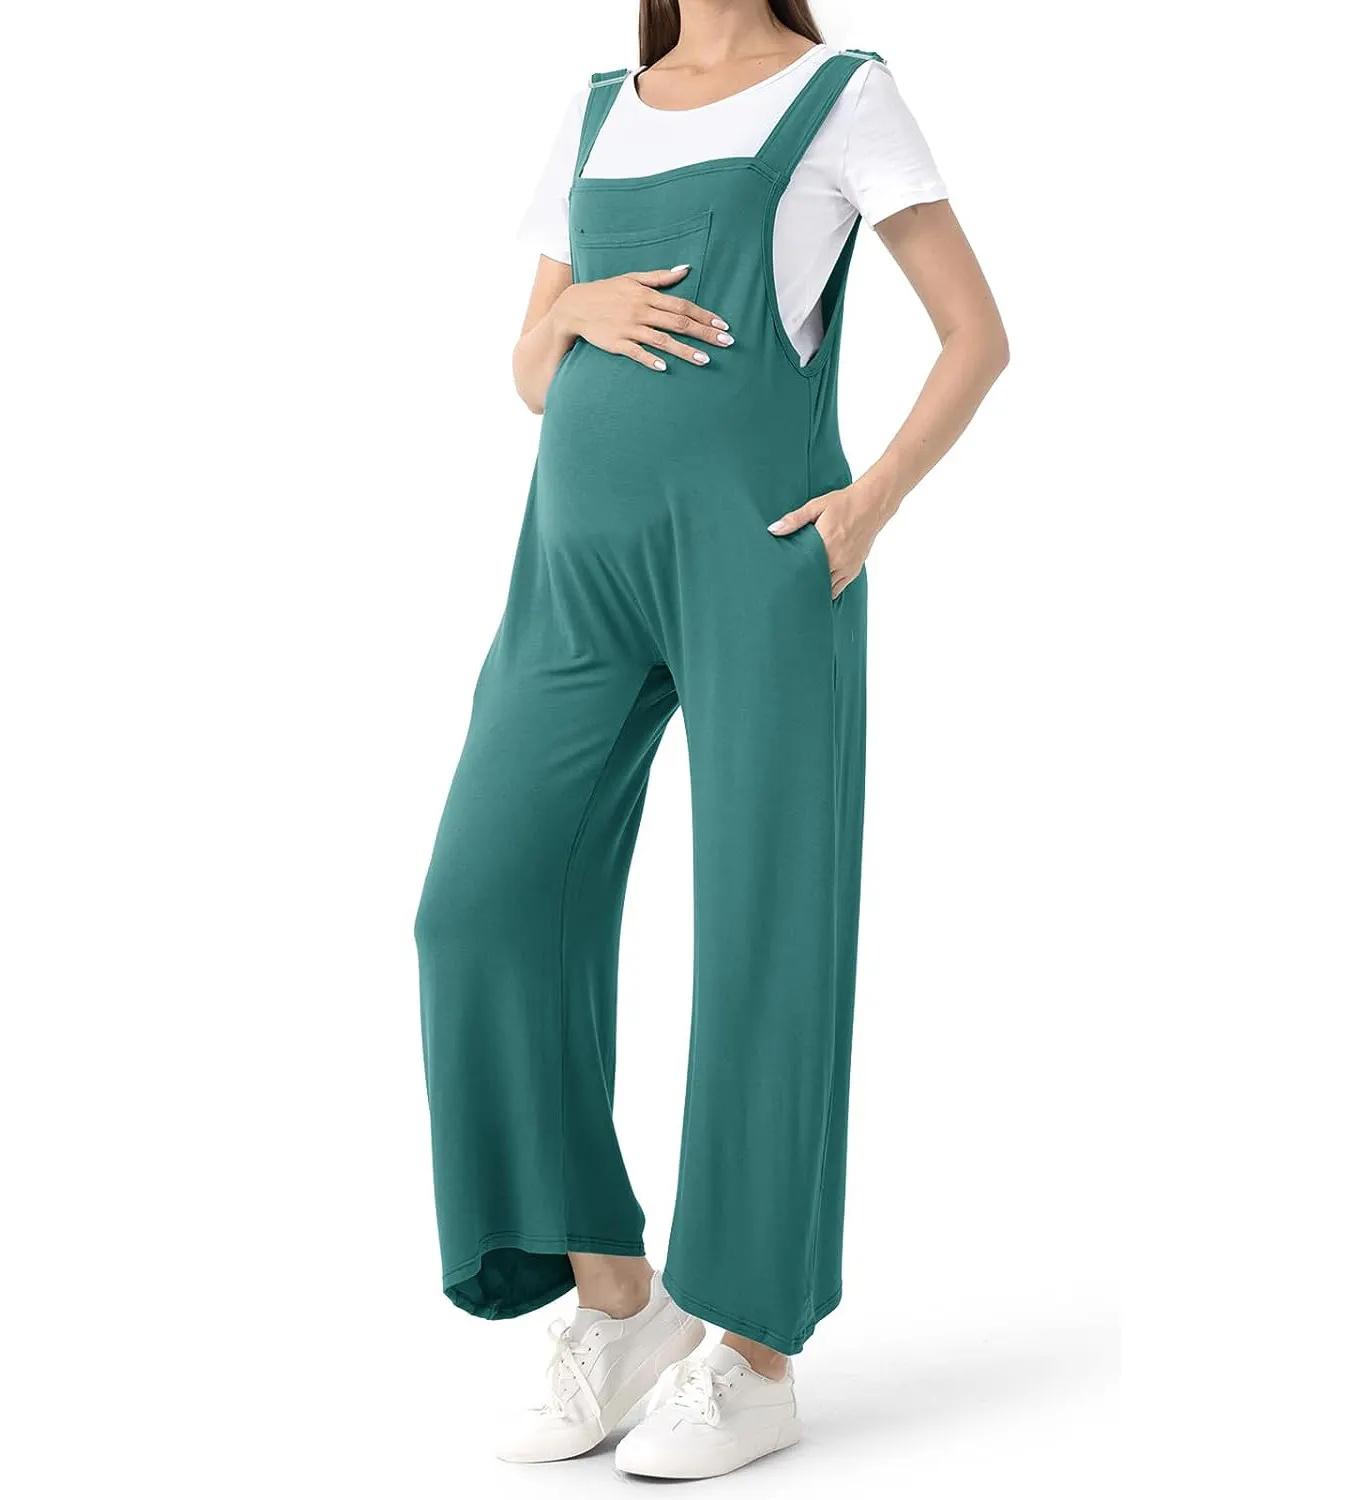 Pregnant Women Overalls Wide Leg Jumpsuits Loose Sleeveless Straps Casual Maternity Rompers Jumpers With Pockets Outfits